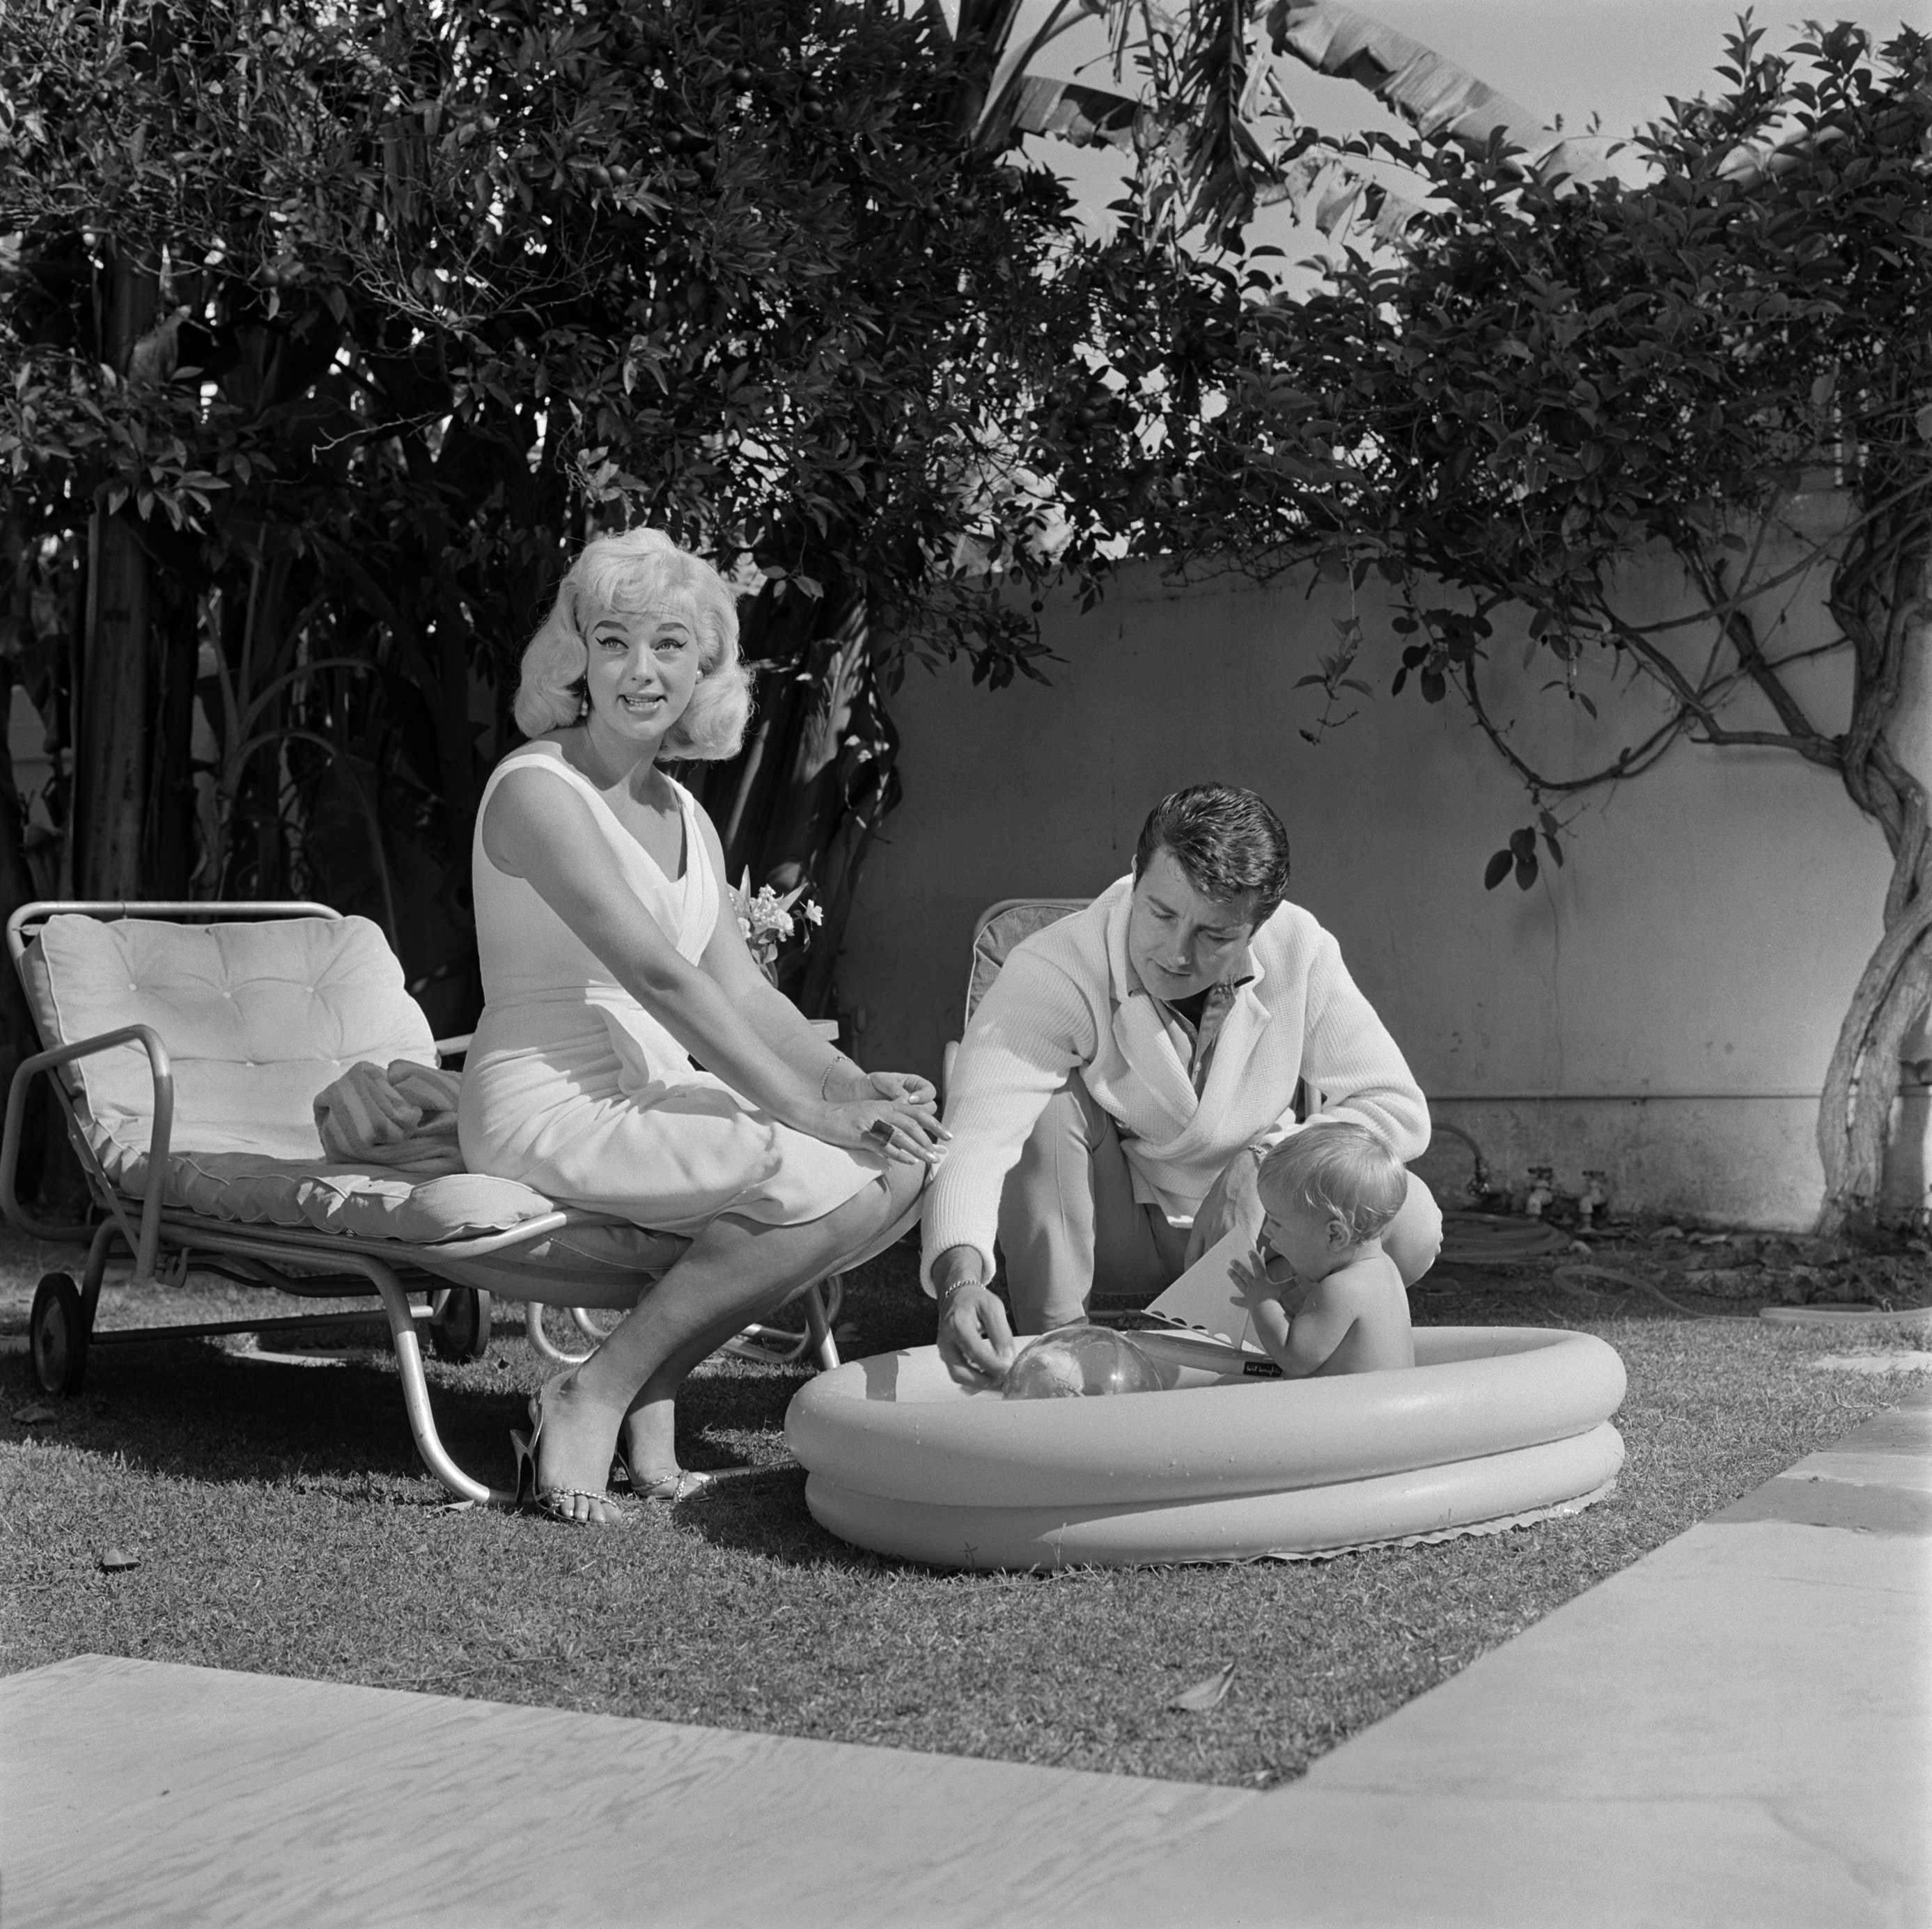 Diane Dors with Richard Dawson, and their son, Mark, at home in an image dated September 20, 1960. | Source: CBS/Getty Images